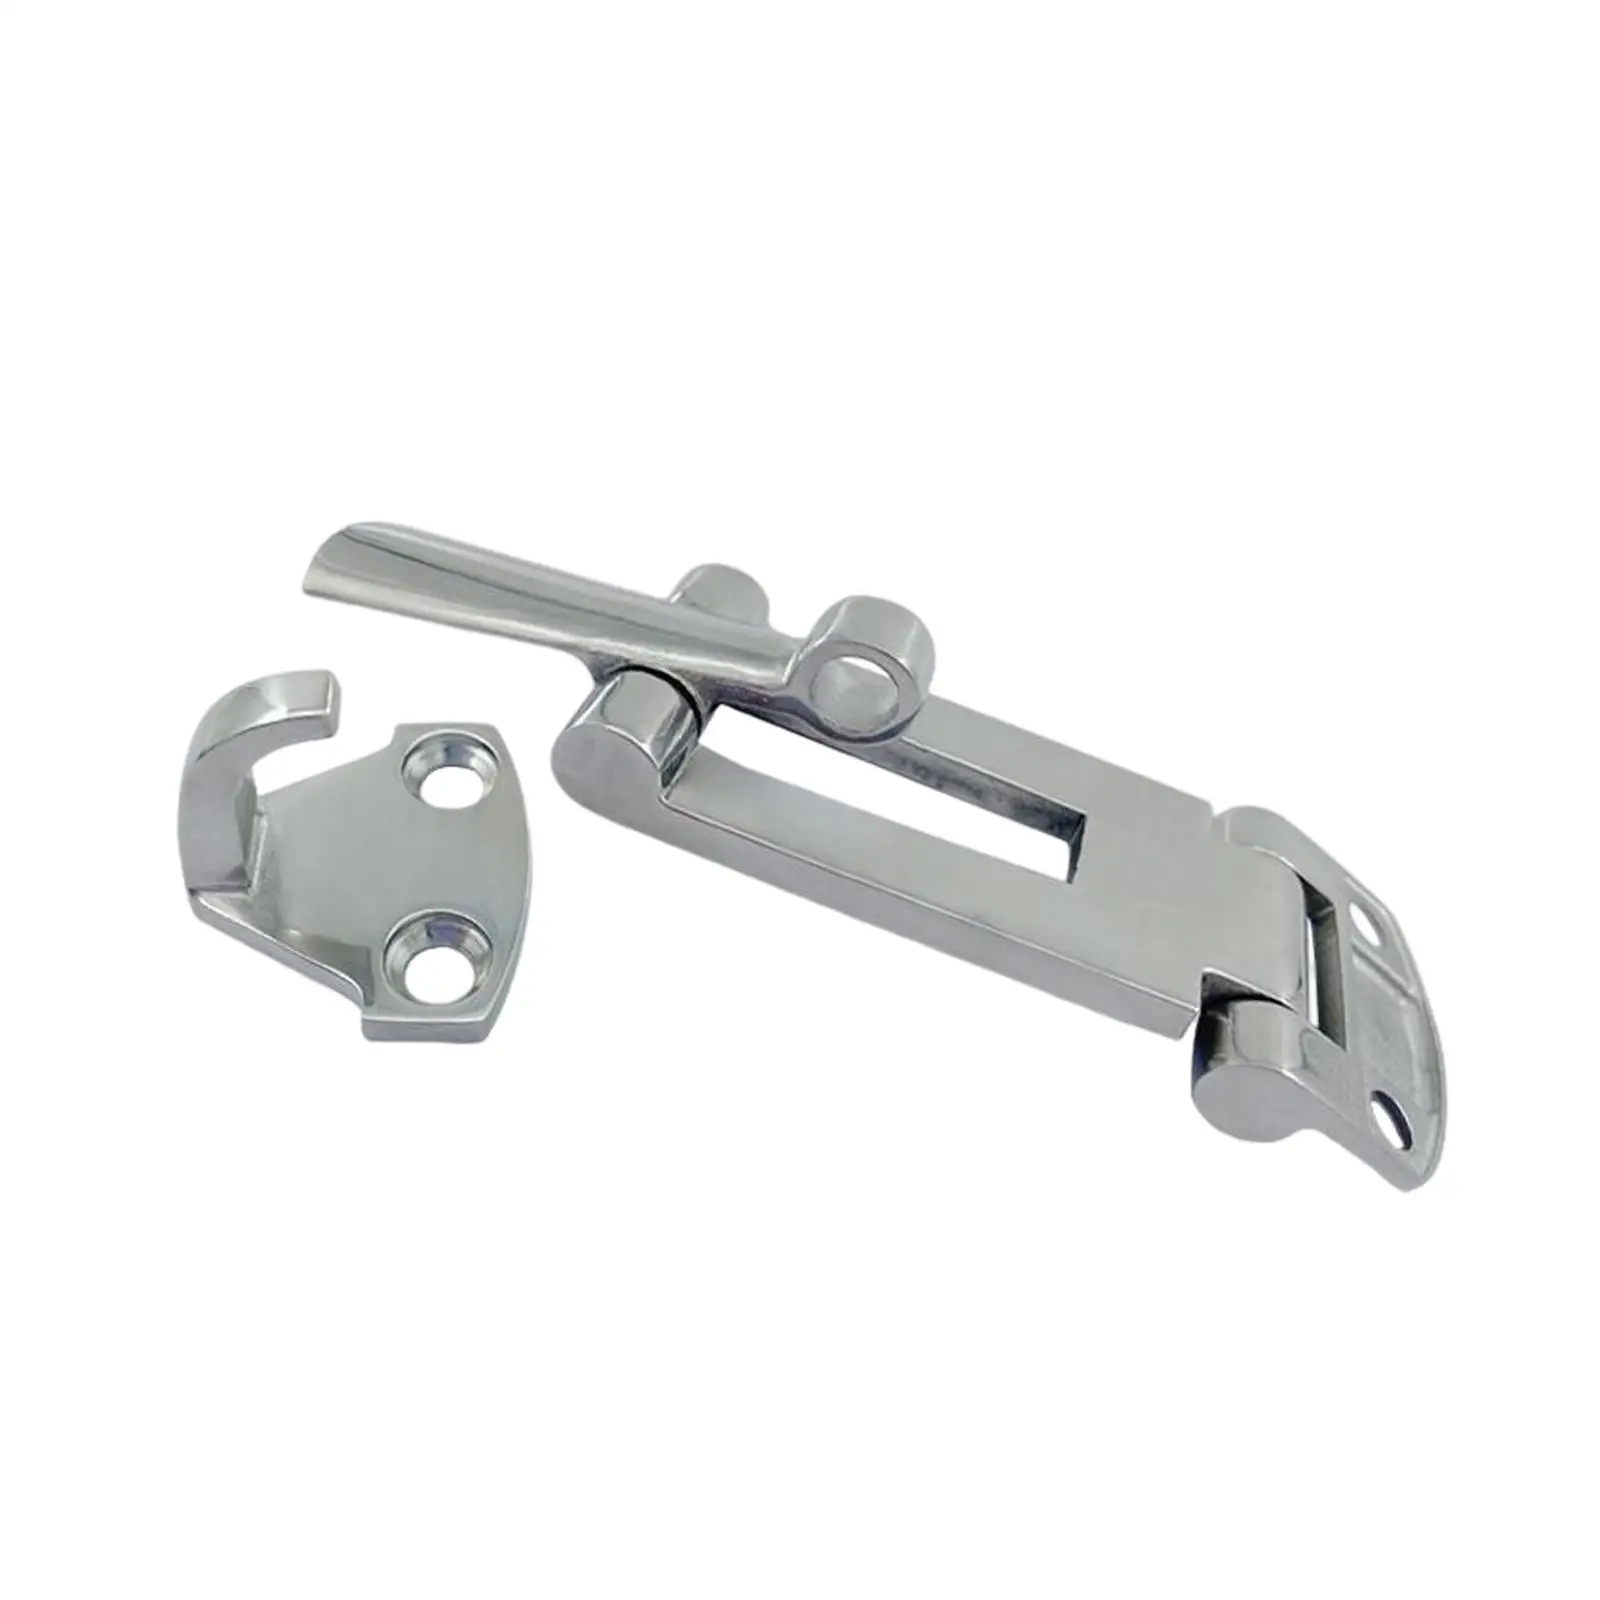 Cabinet Door Latch Silver 316 Stainless Steel Anti Rattle Latch for Yacht Boat